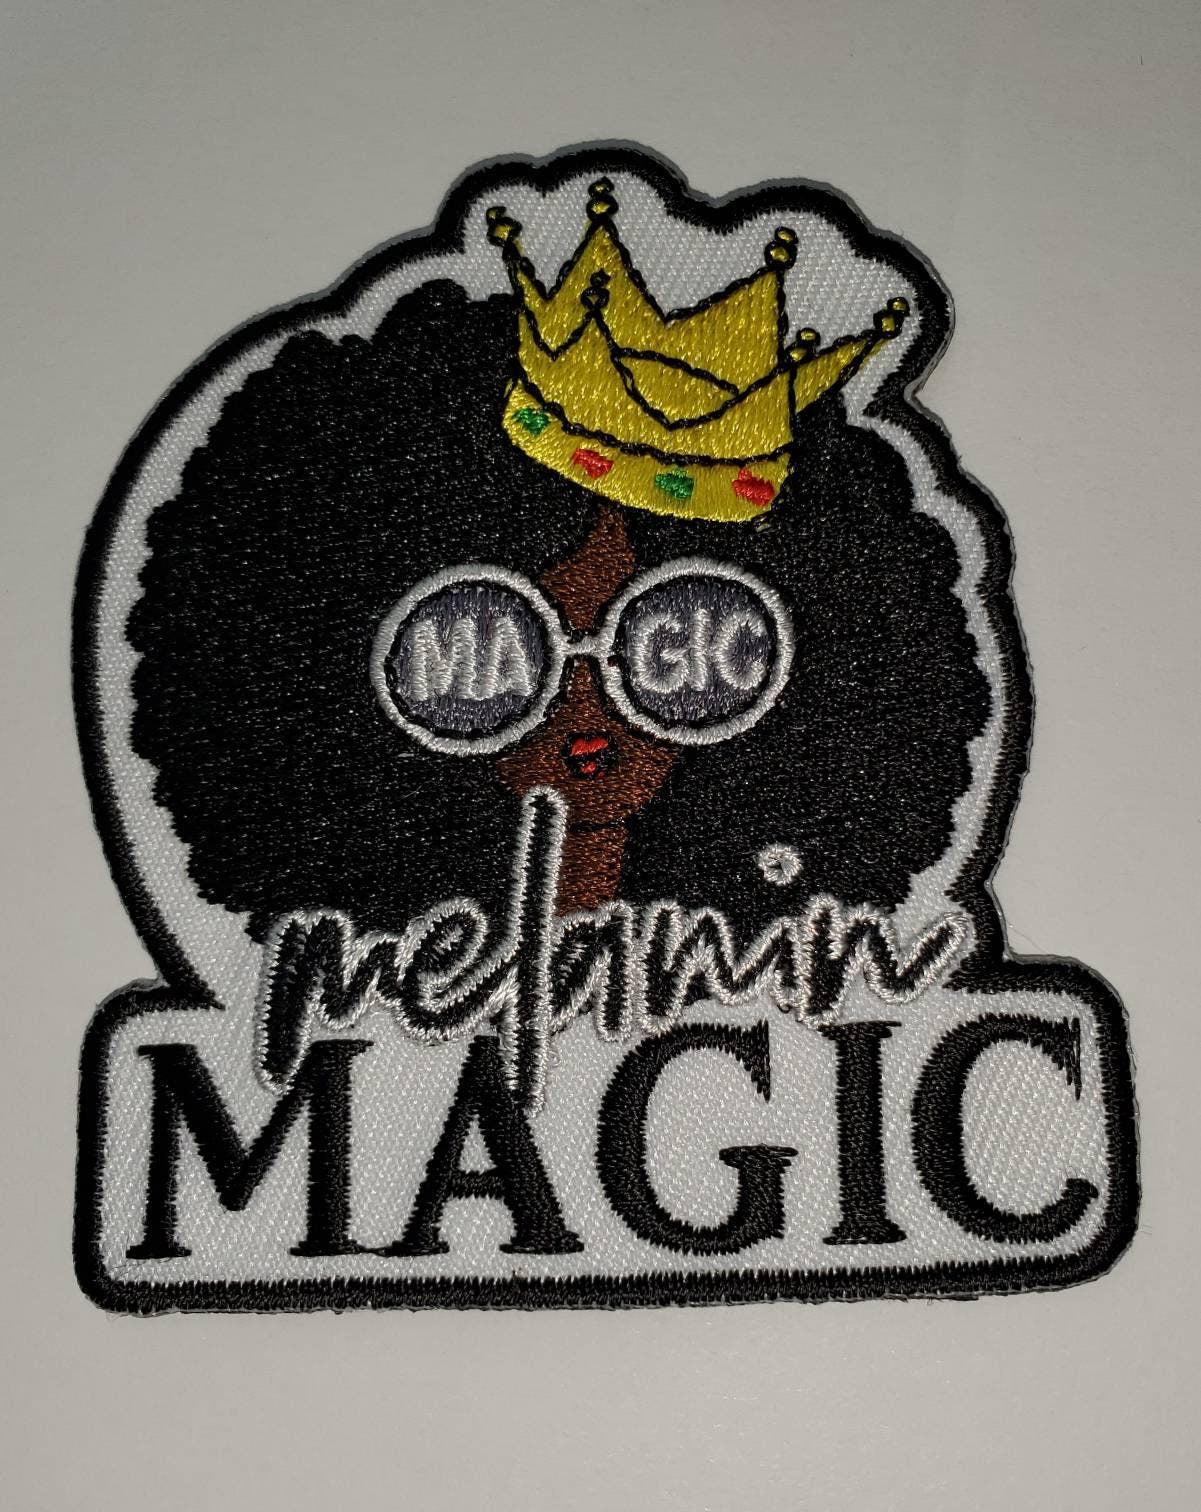 Melanin Magic "Sunglasses" Afro Puff Diva with Crown Patch, Popular Patch, 3.5-inch Iron-on Embroidered Patch; Cool Patch for Apparel